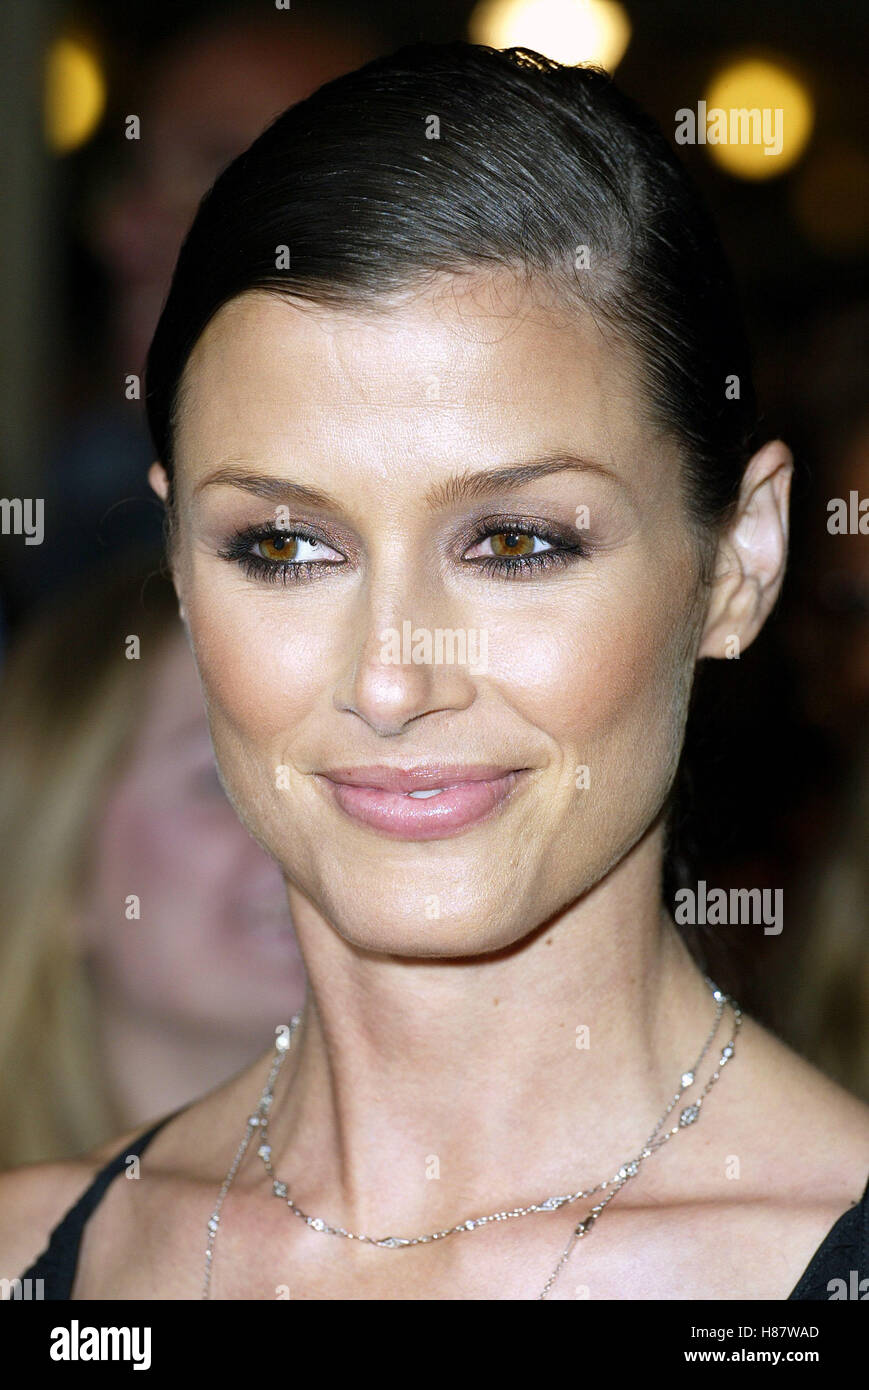 BRIDGET MOYNAHAN ATTENDS THE RECRUIT PREMIERE AT THE CINERAMA